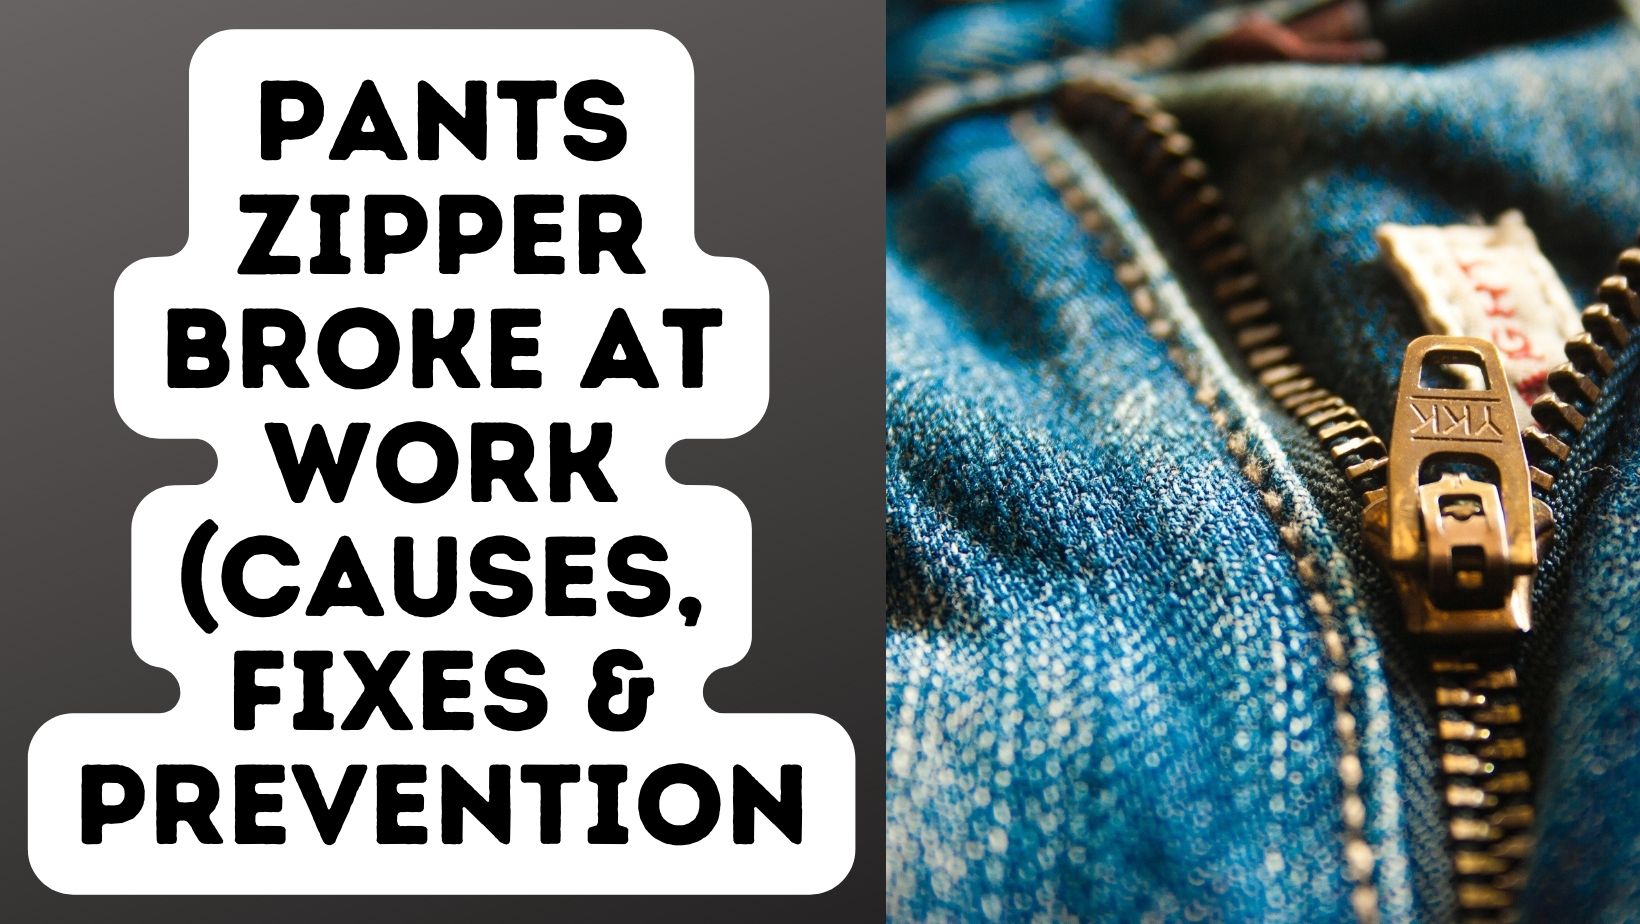 Pants Zipper Broke At Work (Causes, Fixes & Prevention)